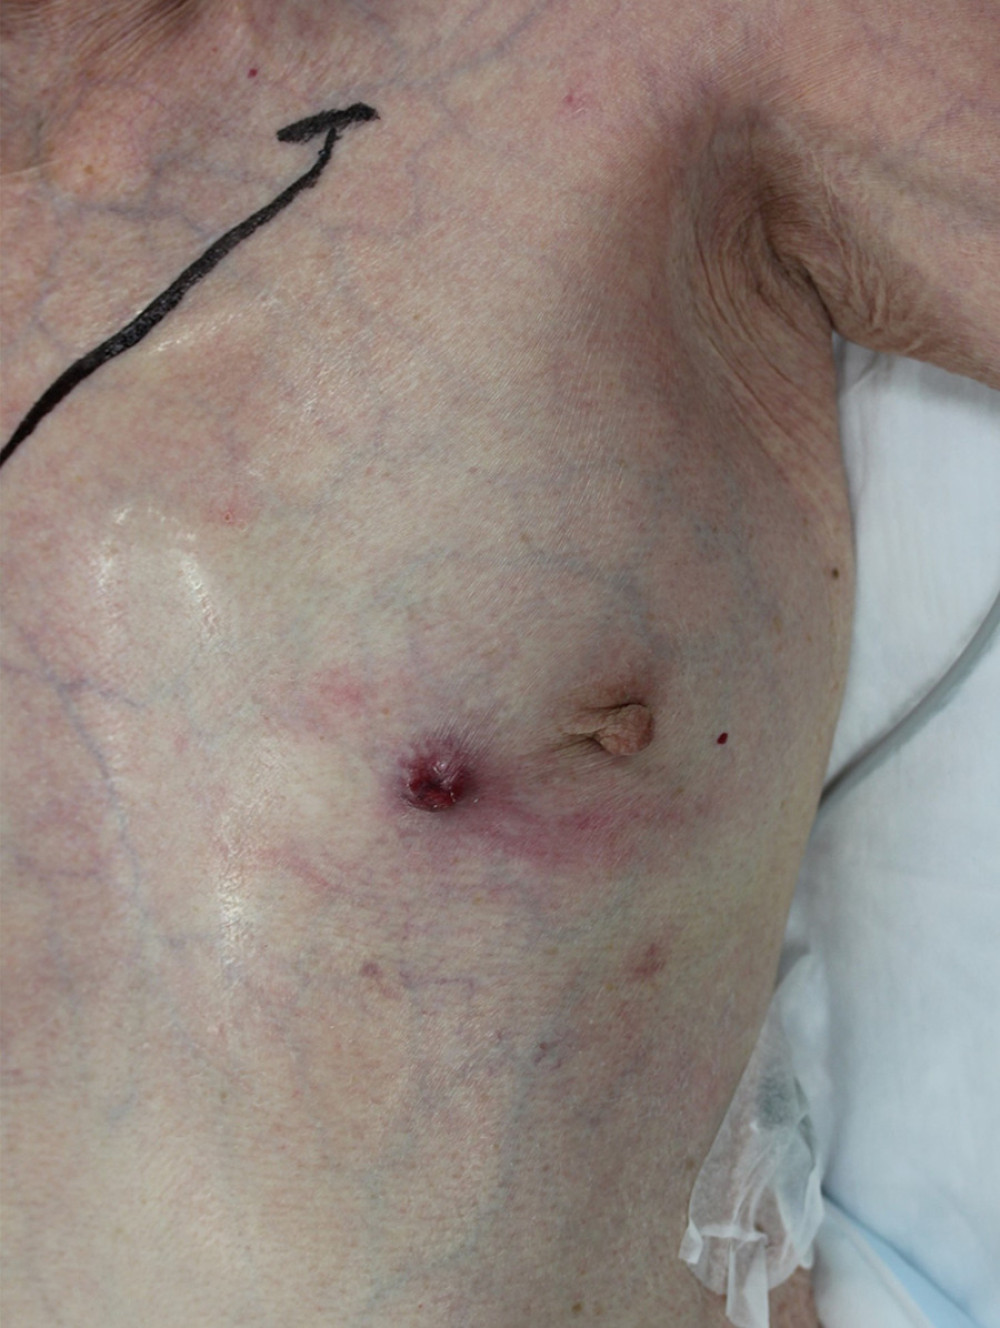 Palpation findings. A mass was palpable at 9 o’clock of the left breast. In addition, erythema was observed on the skin directly over the mass.